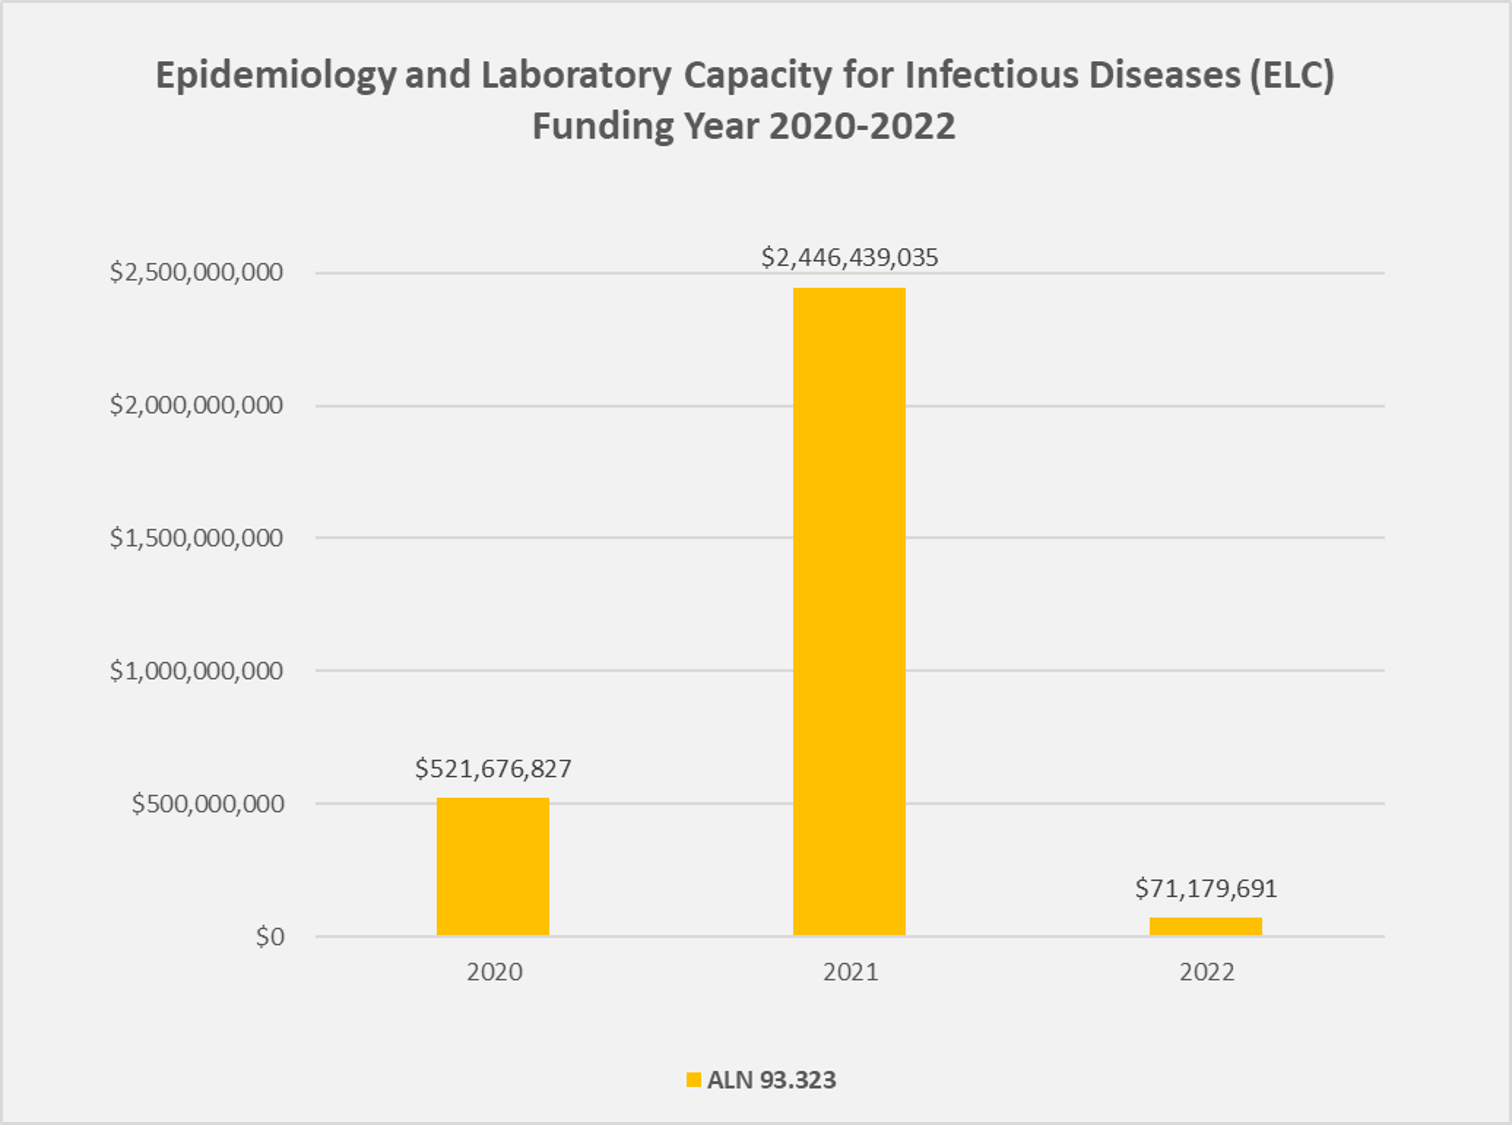 Epidemiology and Laboratory Capacity for Infectious Diseases (ELC) Funding Year 2020-2022